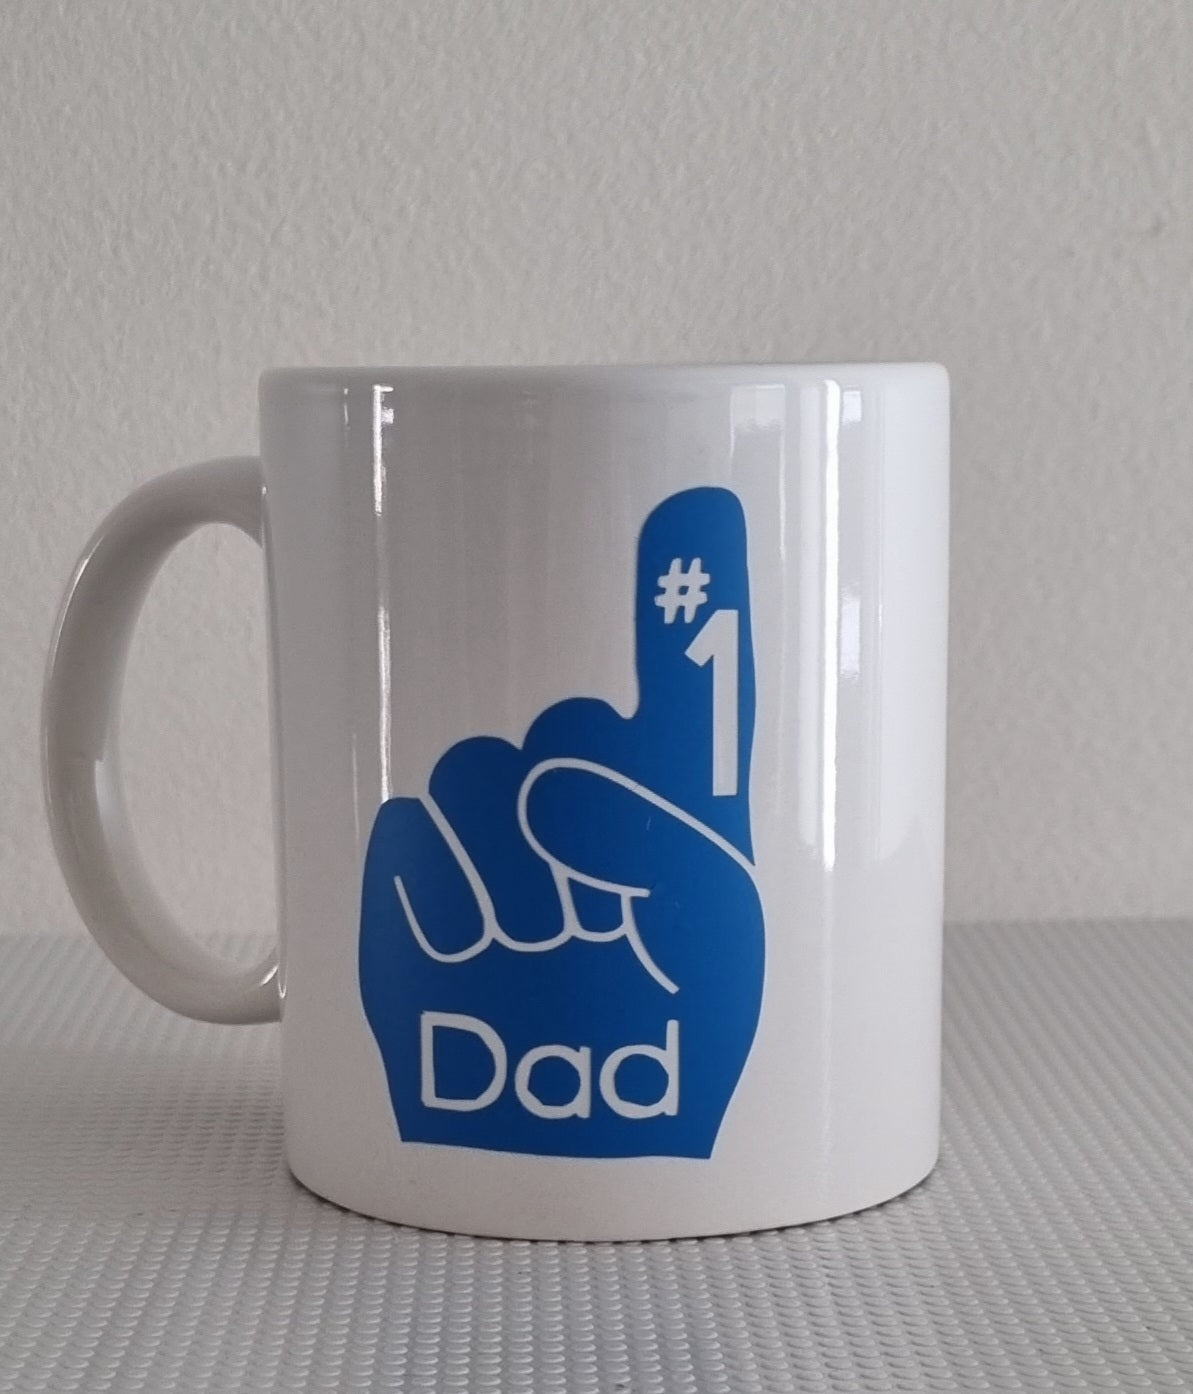 Father's day personalised mug, front side